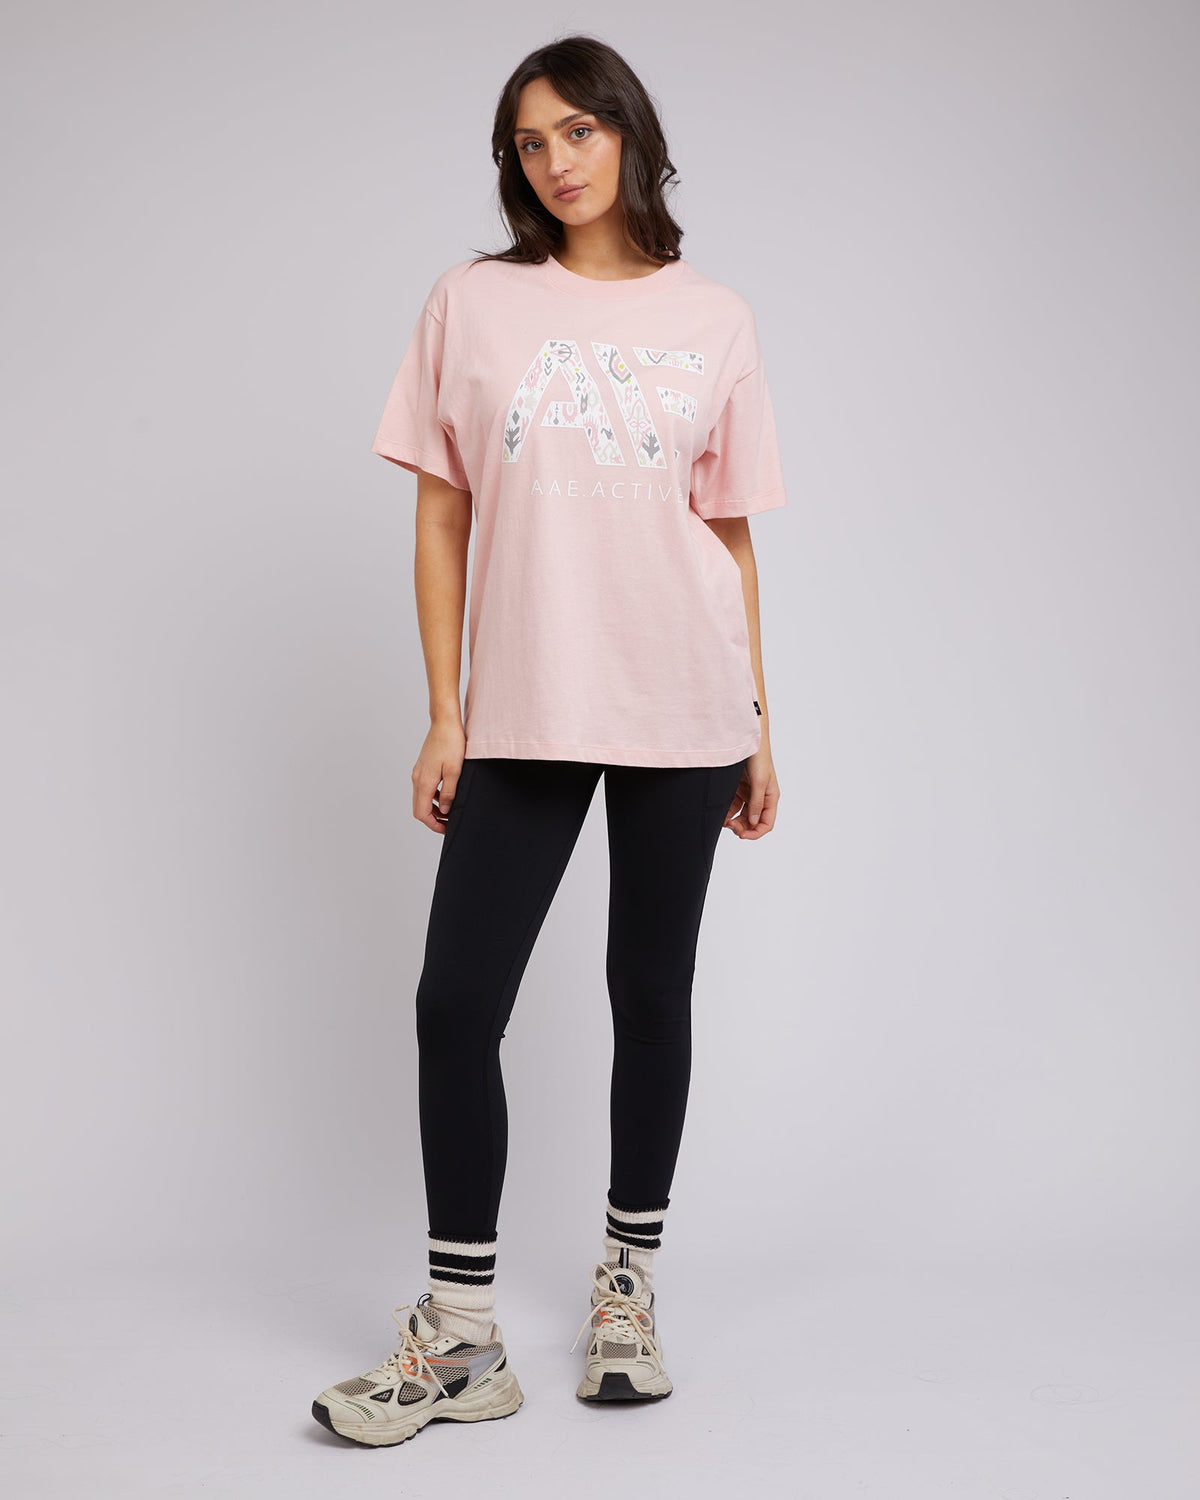 All About Eve-Base Active Tee Pink-Edge Clothing